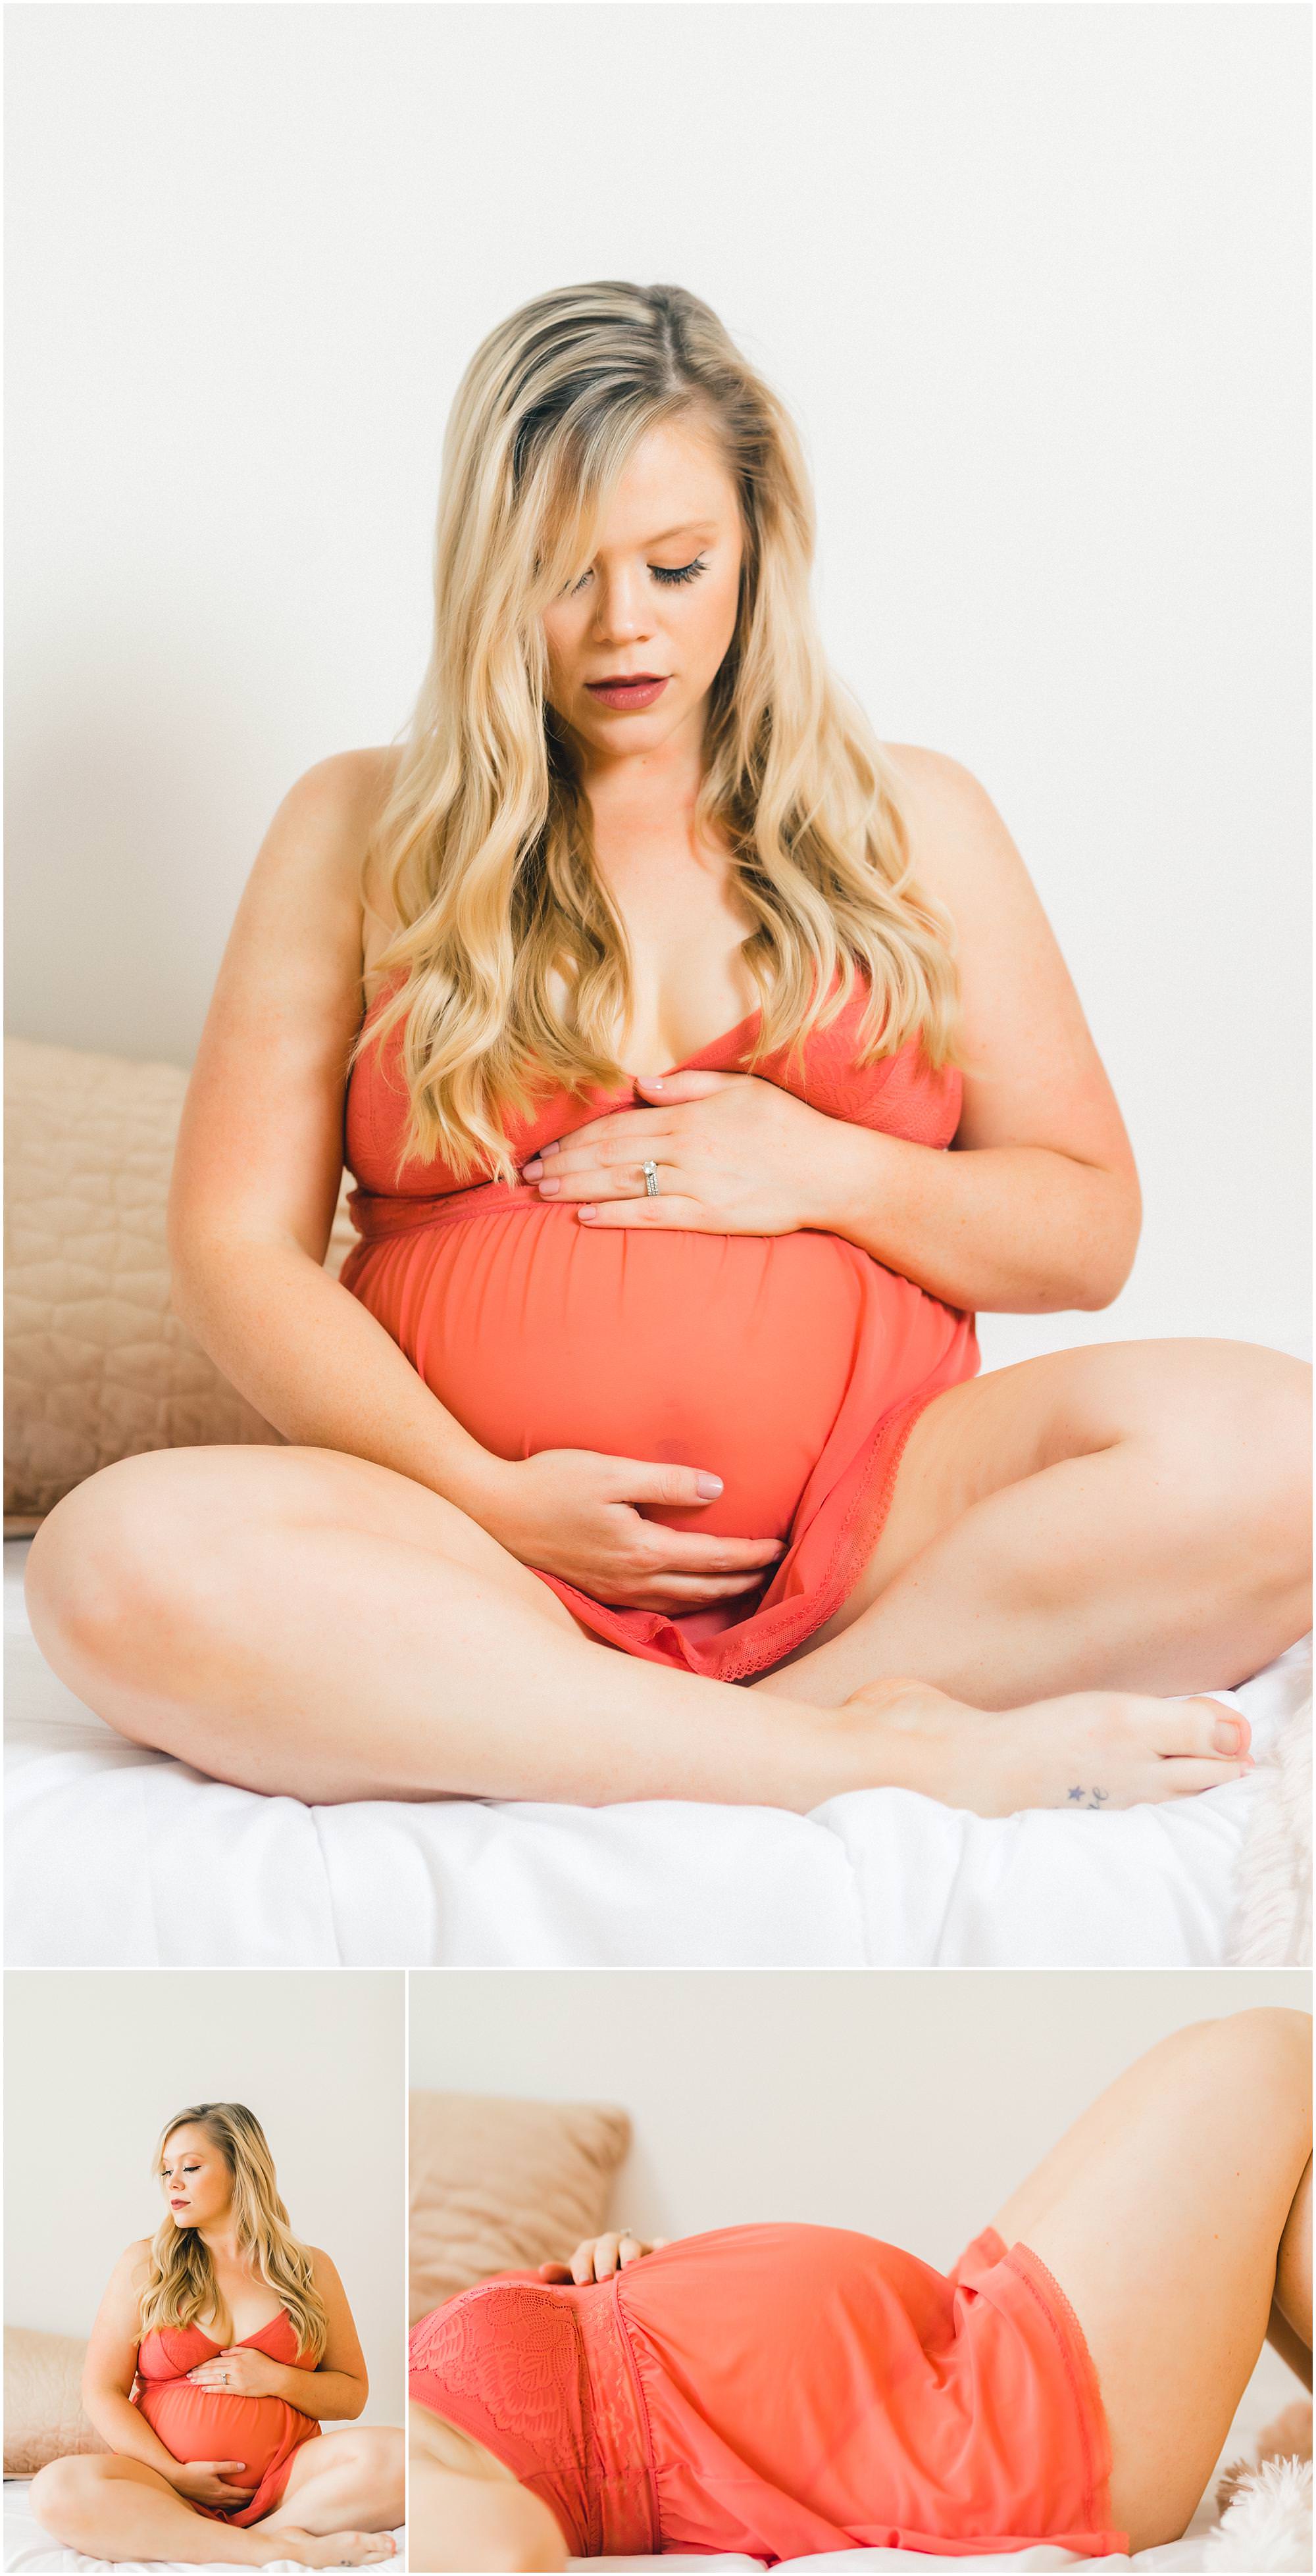 What to wear maternity boudoir photography session